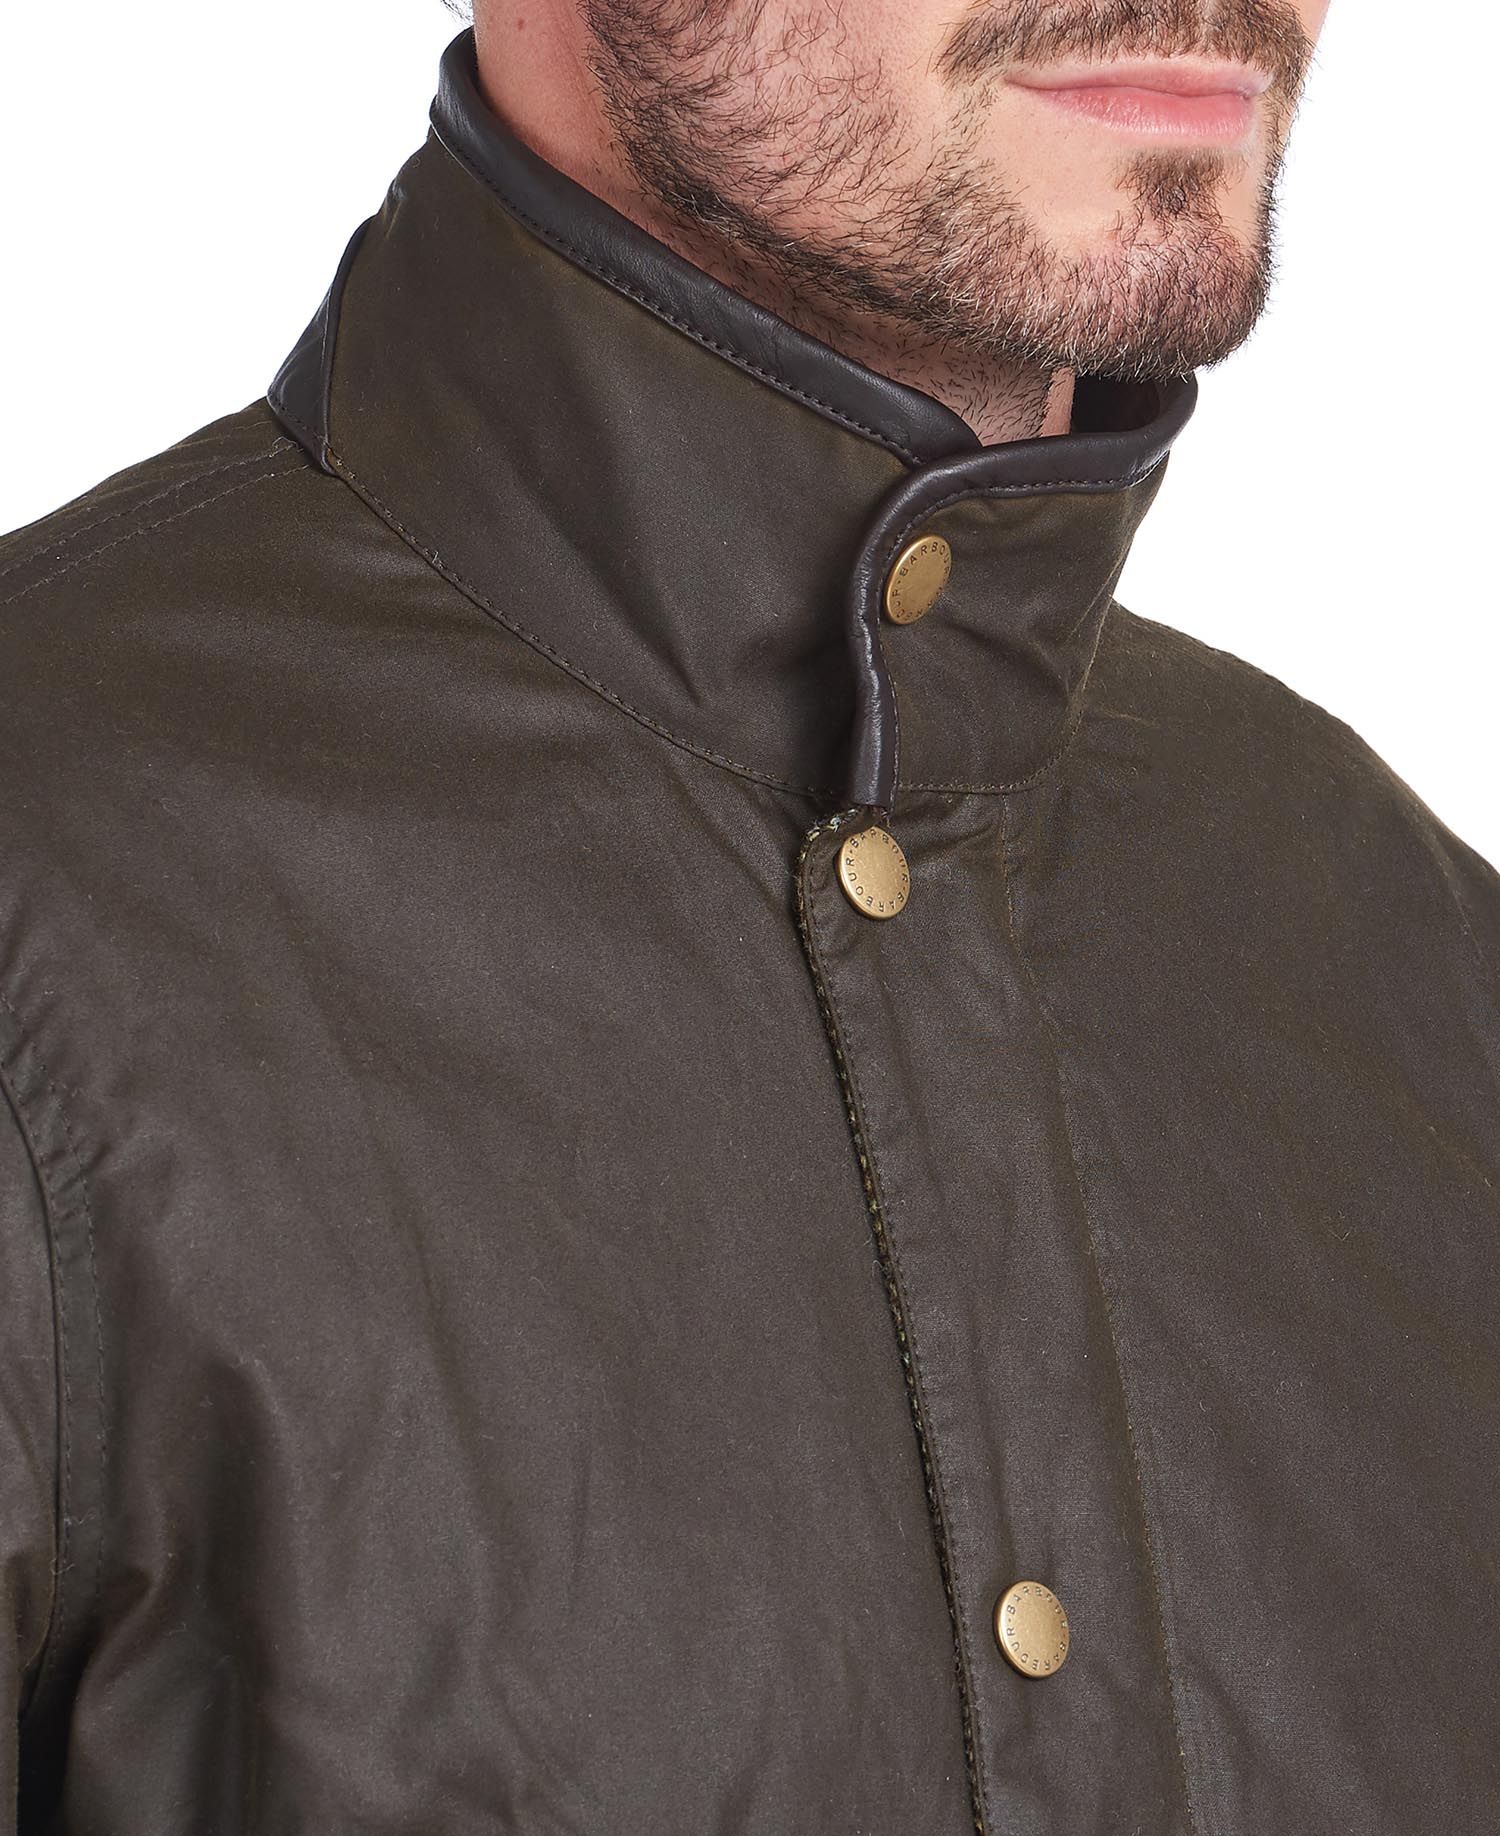 Barbour, Hereford, Wax, Jacket, collar